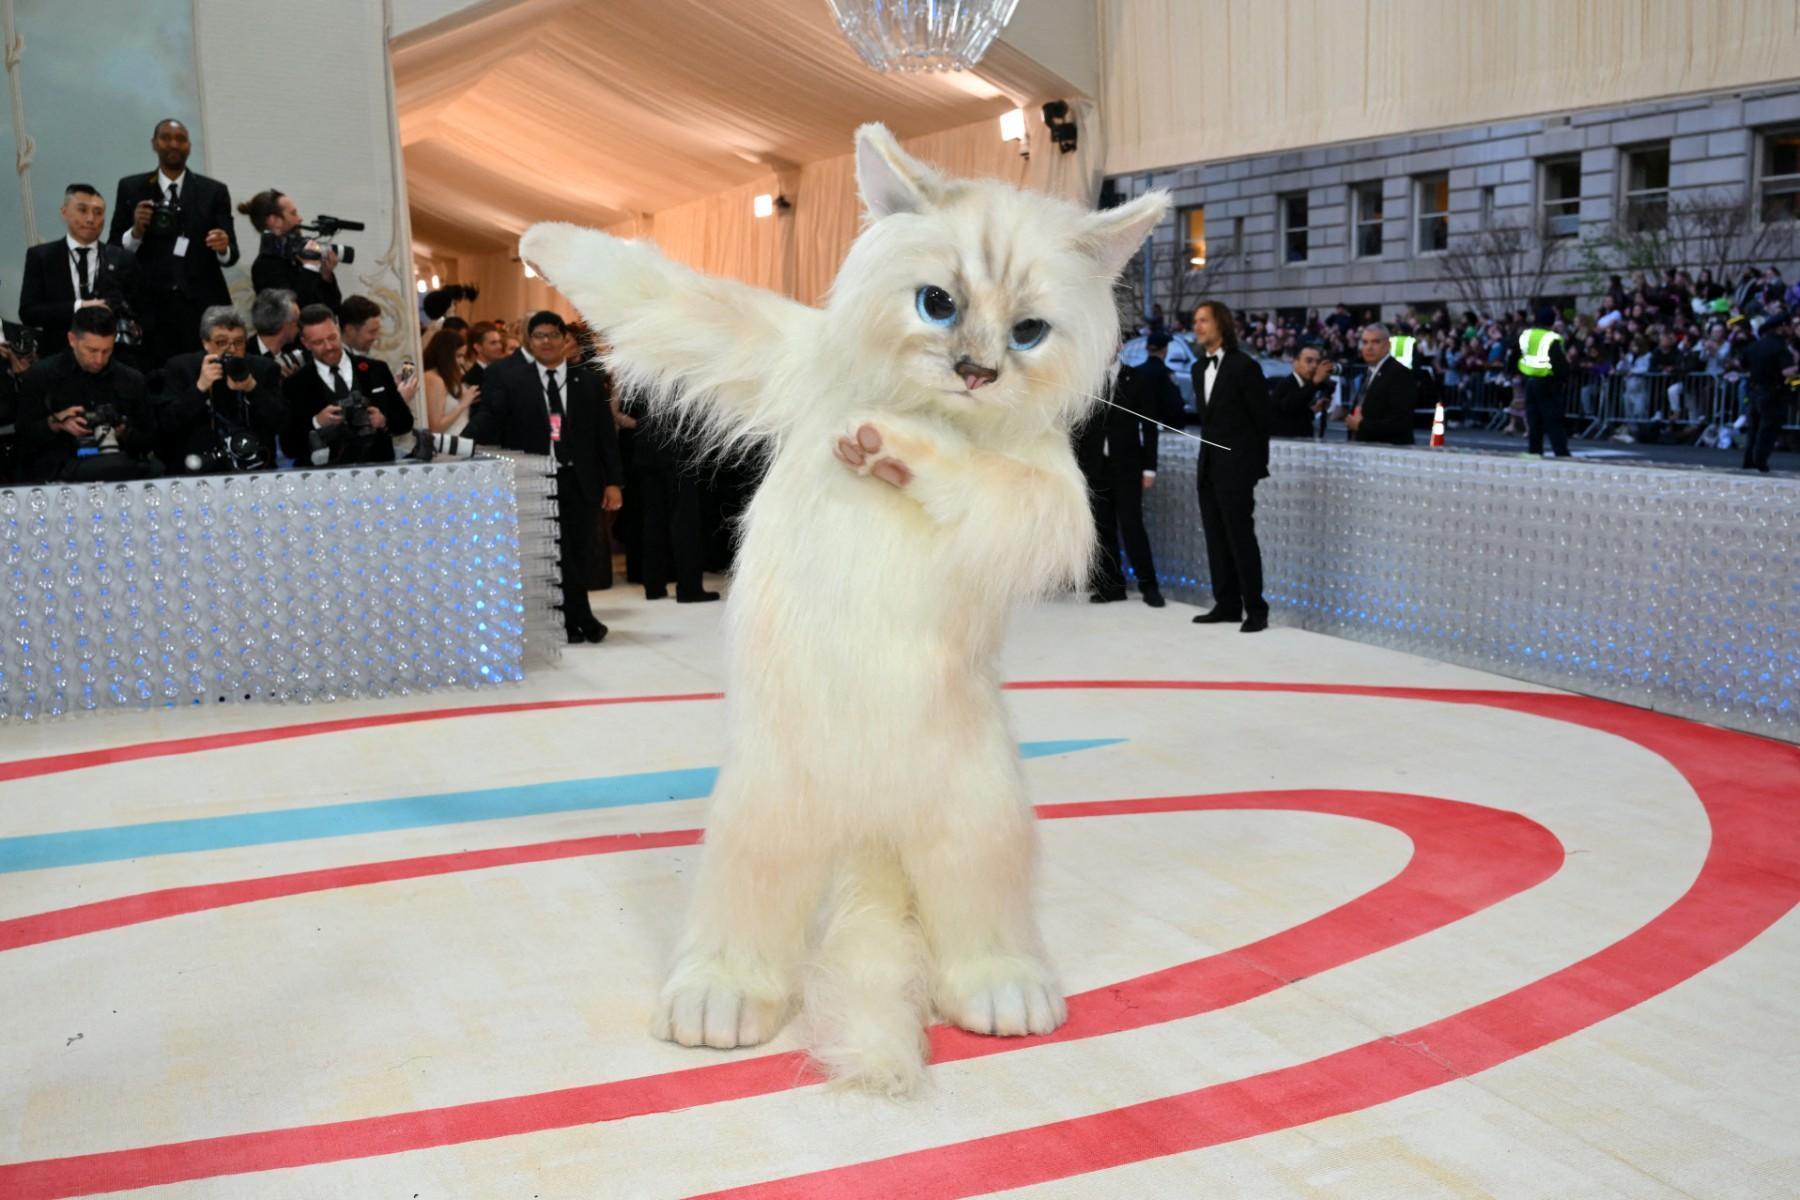 At the 2023 Met Gala, Jared Leto donned a gigantic cat costume complete with plush paws, whiskers, and hyper-realistic blue eyes, stealing the show.